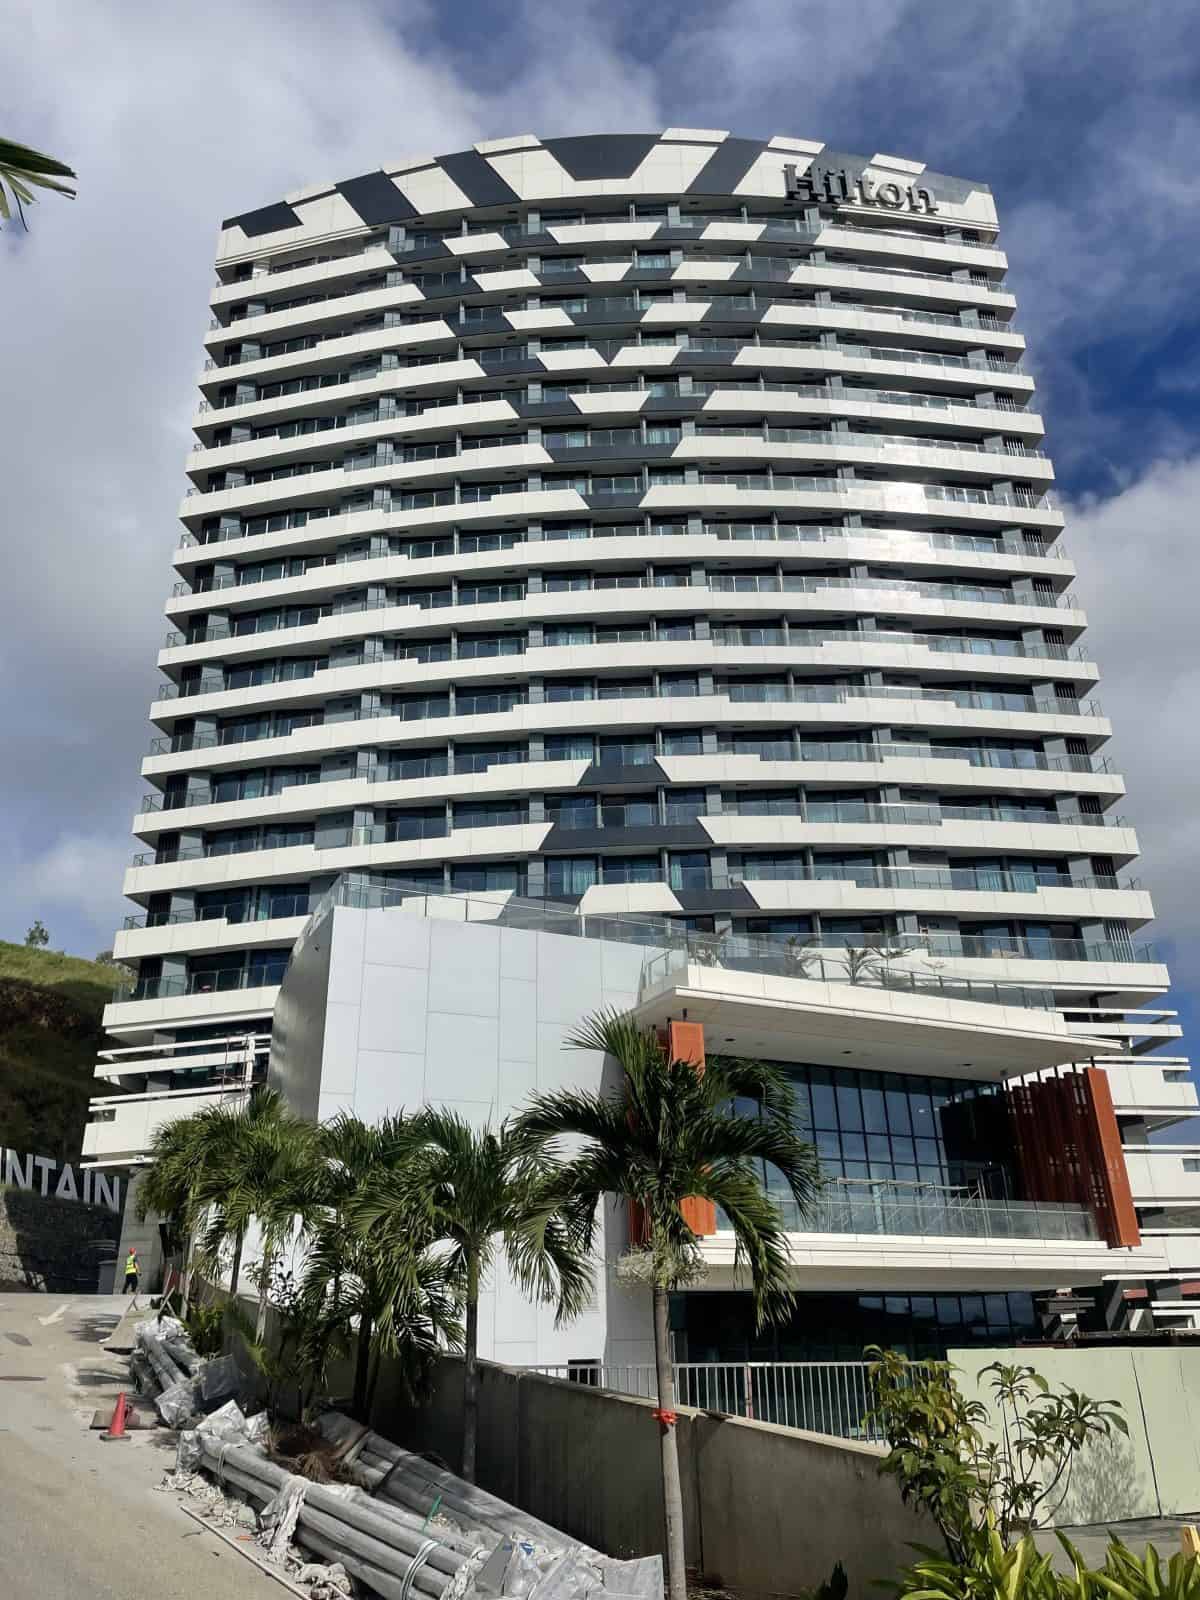 fire engineering work completed for the hilton hotel in port Moseby